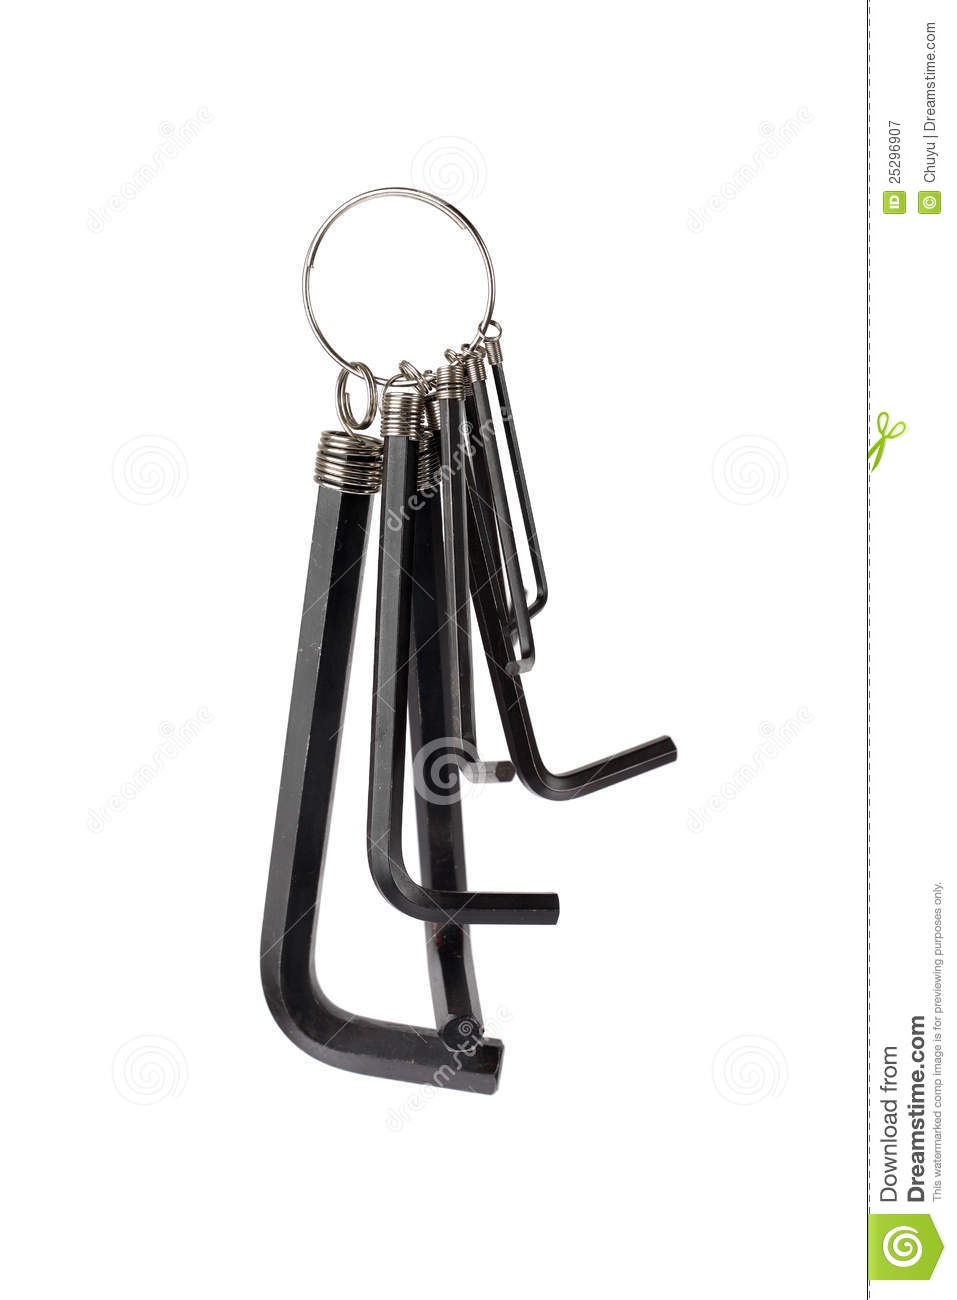 Royalty Free Stock Photography  Hex Key Wrench Set